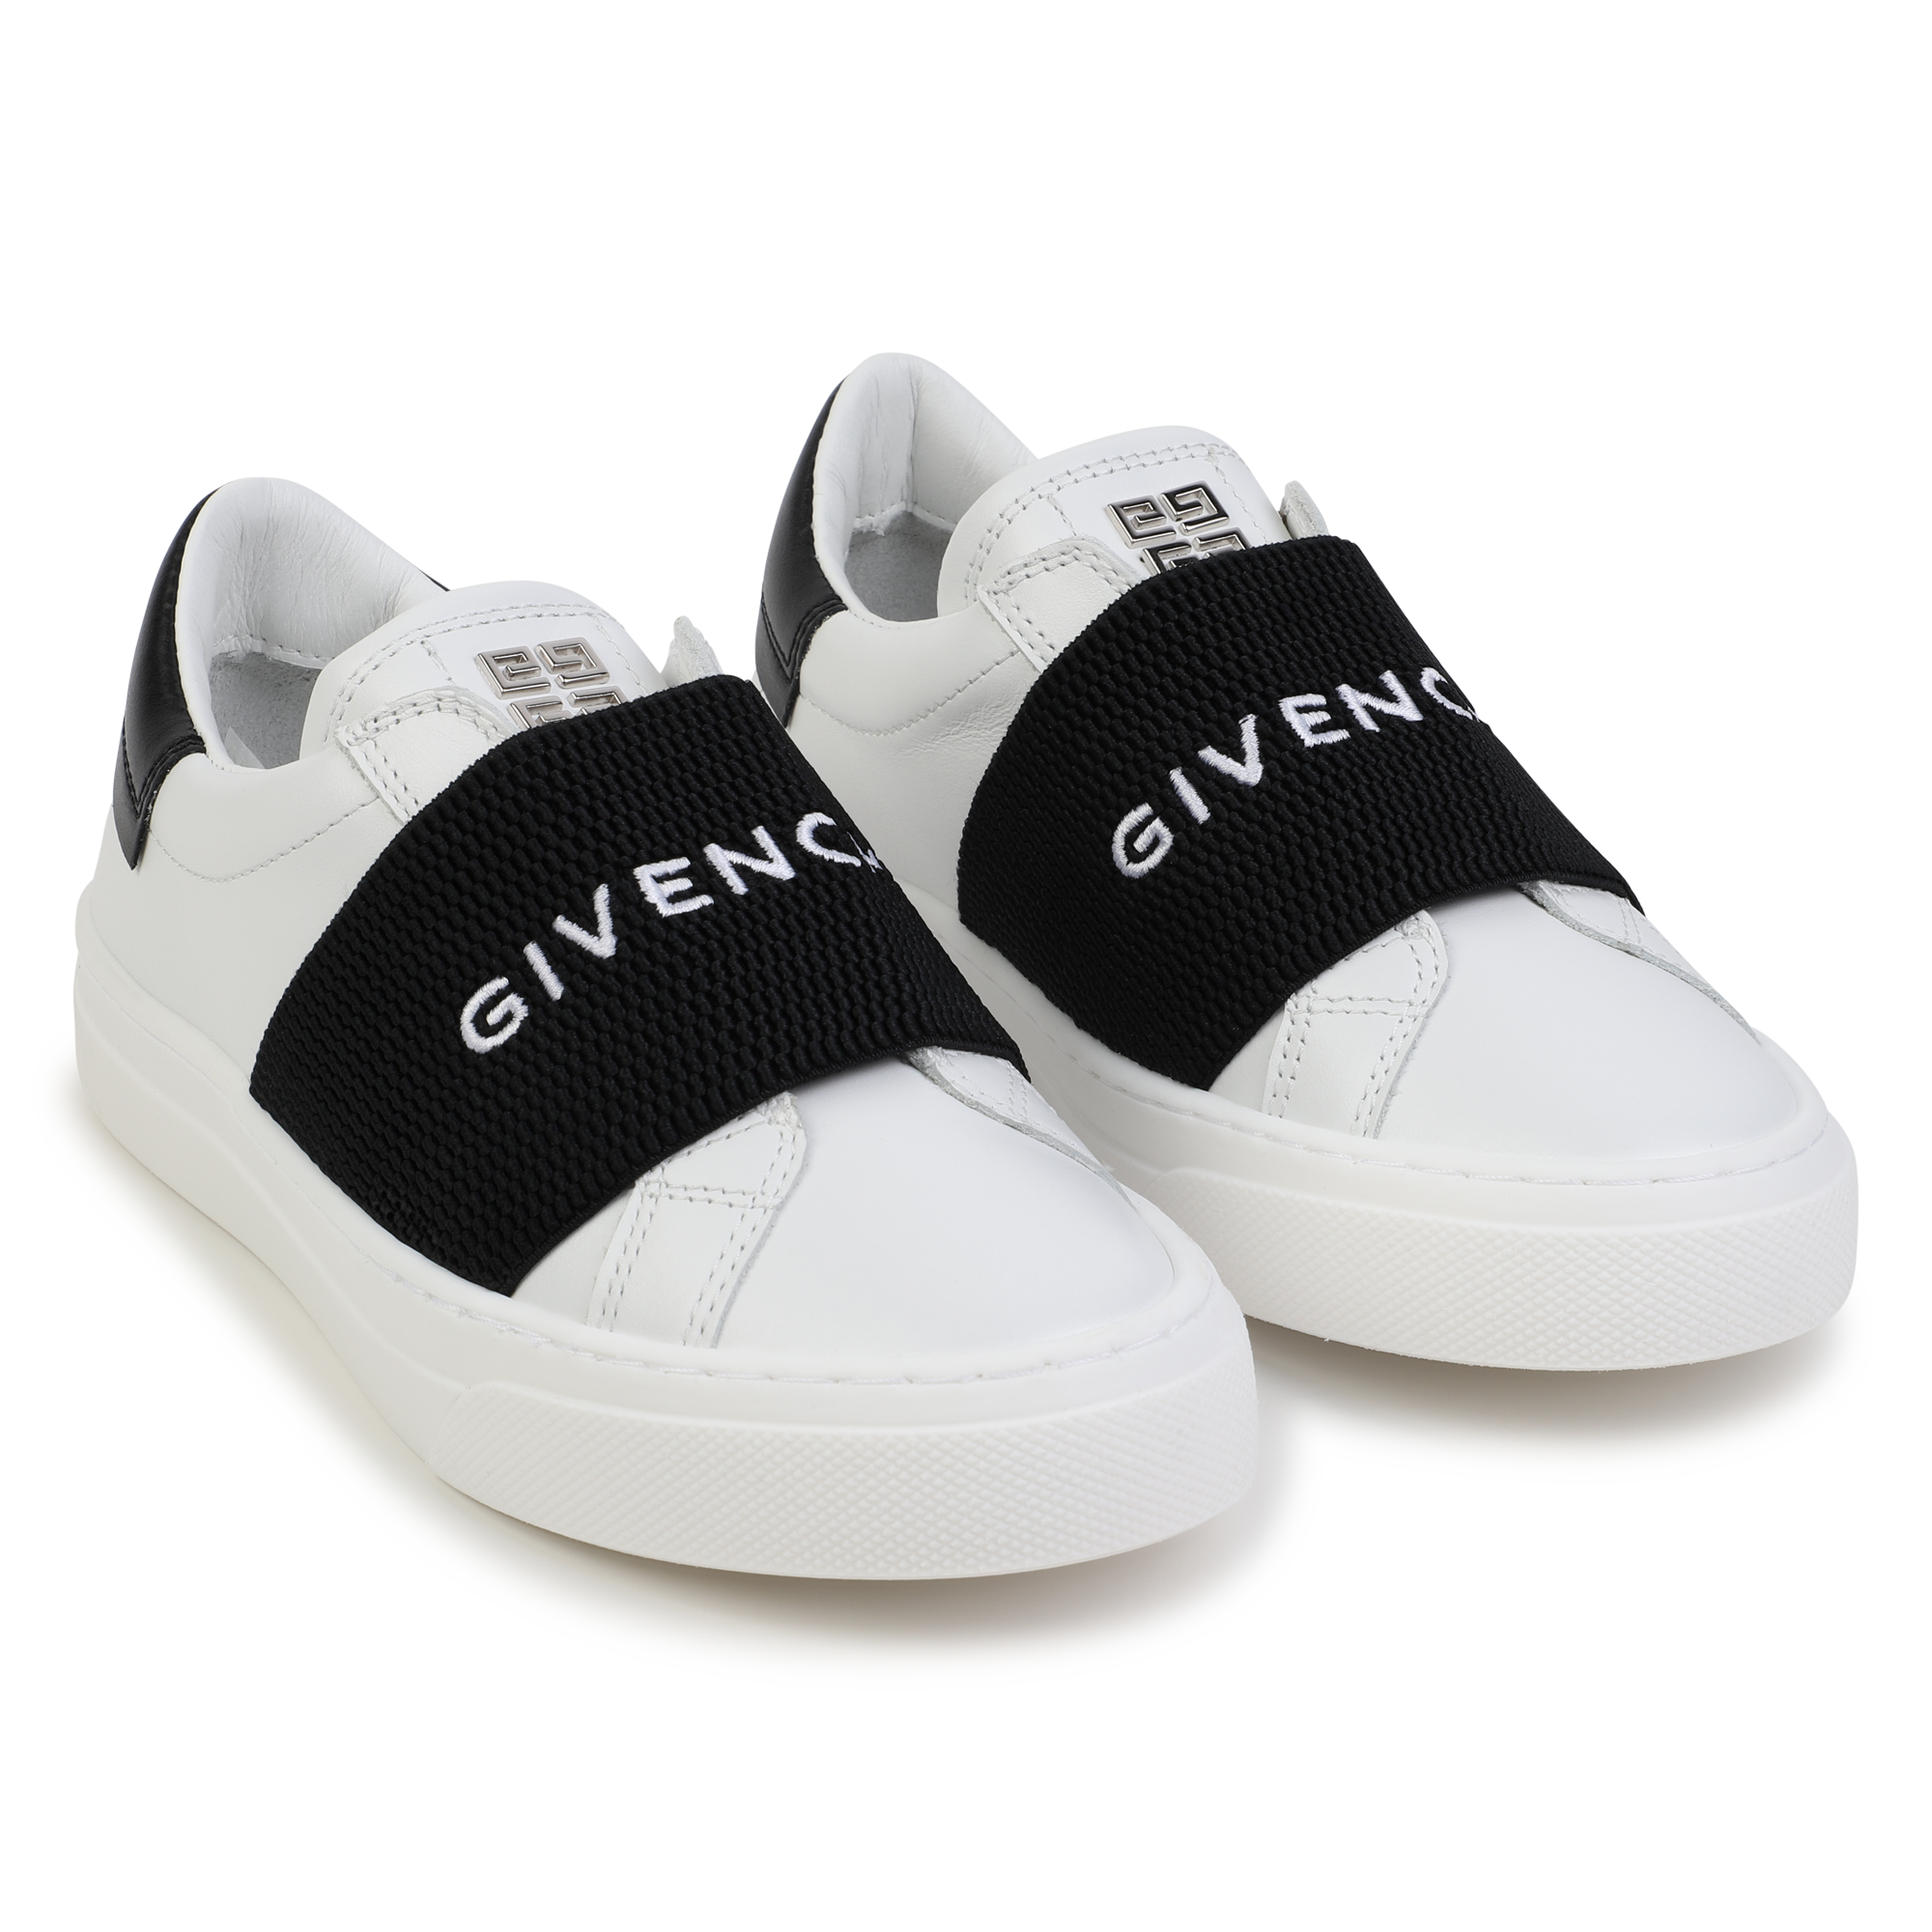 Givenchy - GIV Runner logo leather sneakers Givenchy